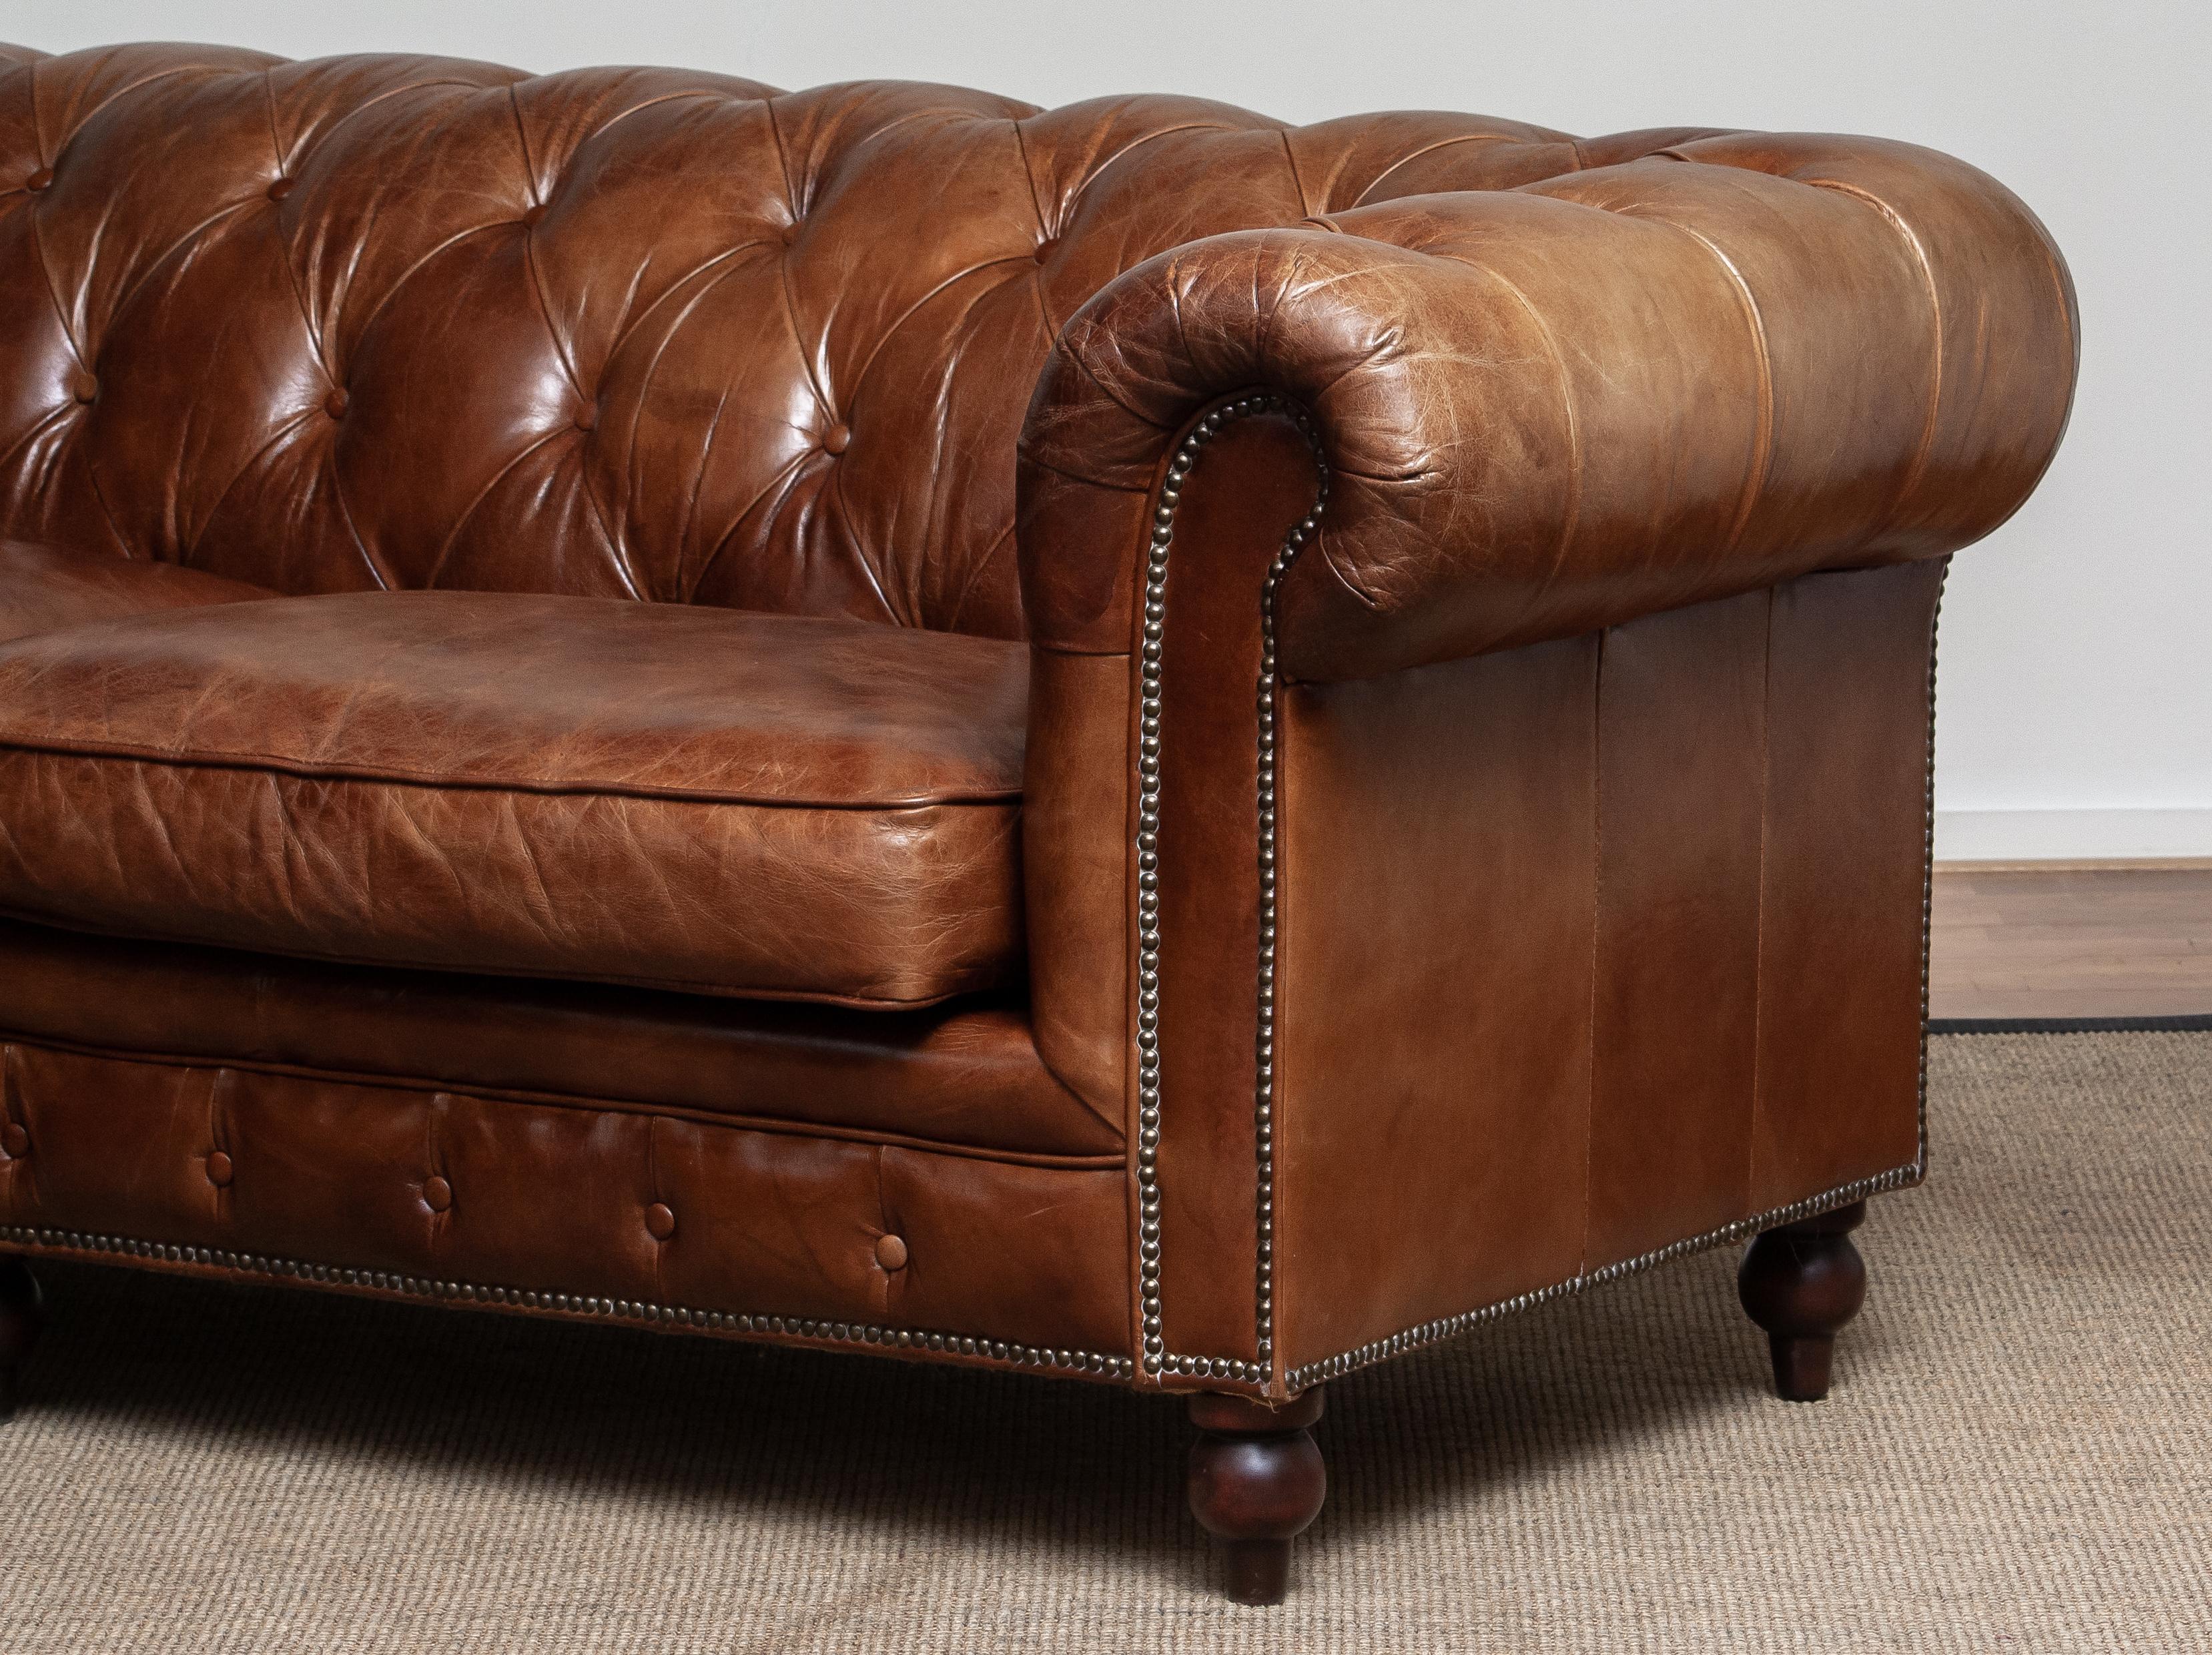 Tufted Brown Leather English Chesterfield Sofa from the 20th Century 6